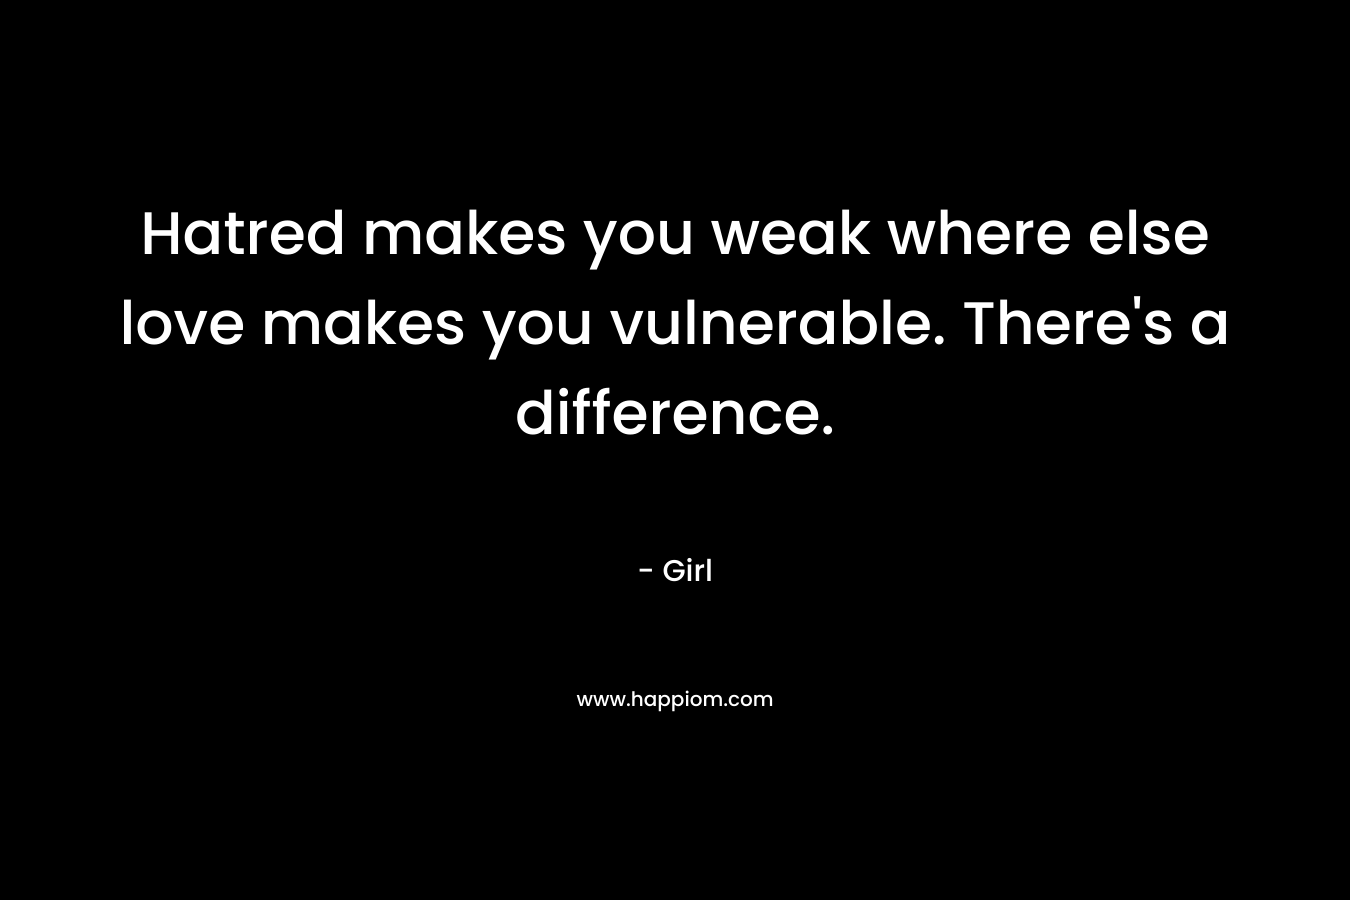 Hatred makes you weak where else love makes you vulnerable. There's a difference.